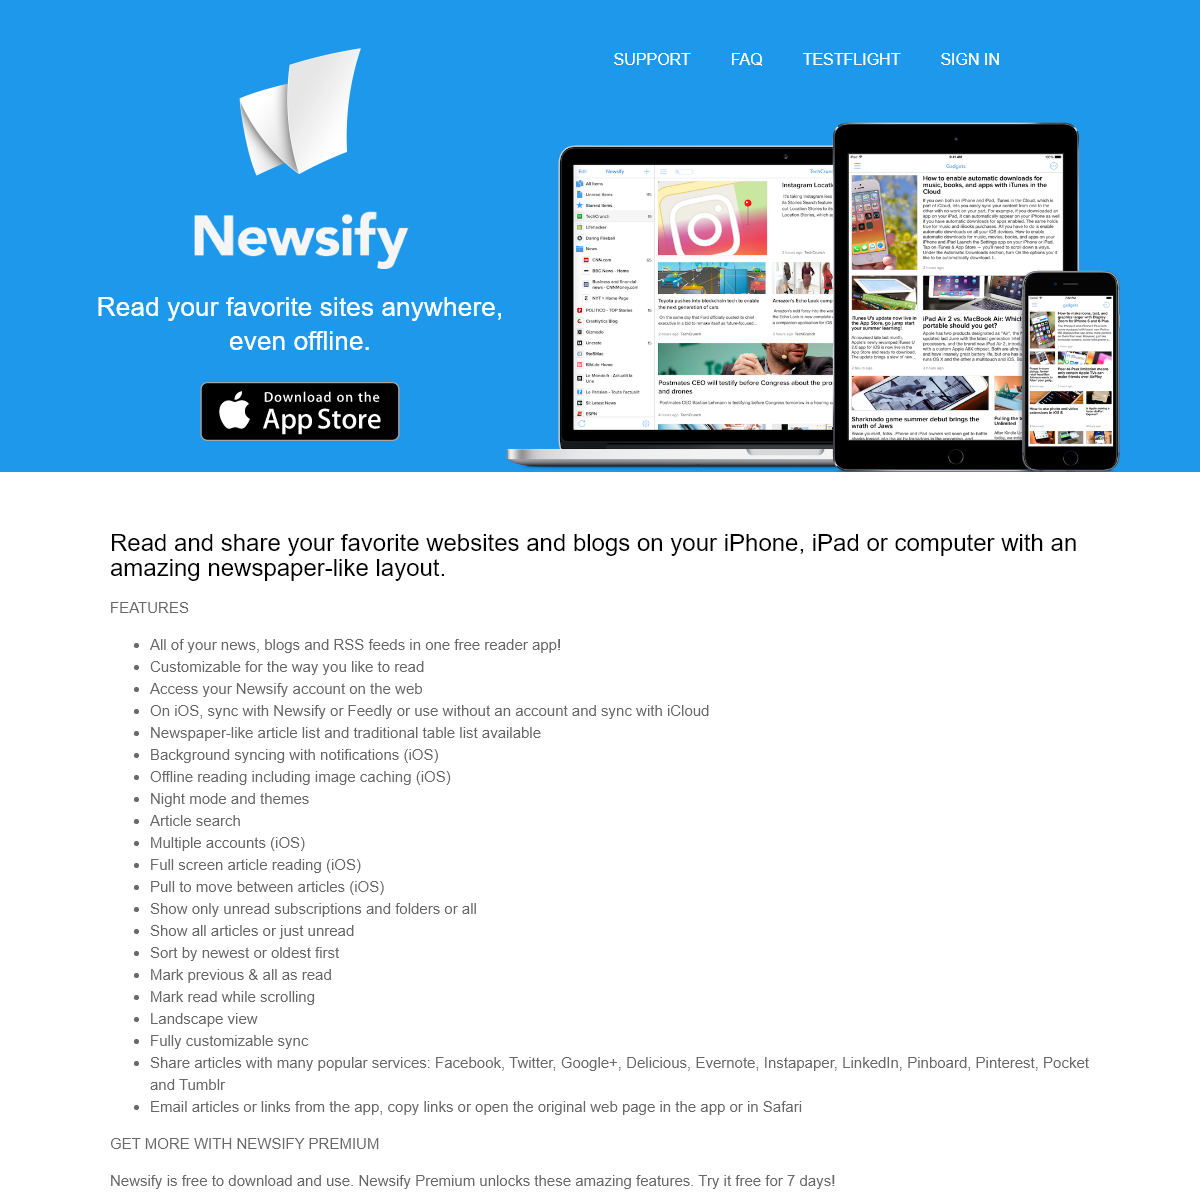 A complete backup of newsify.co